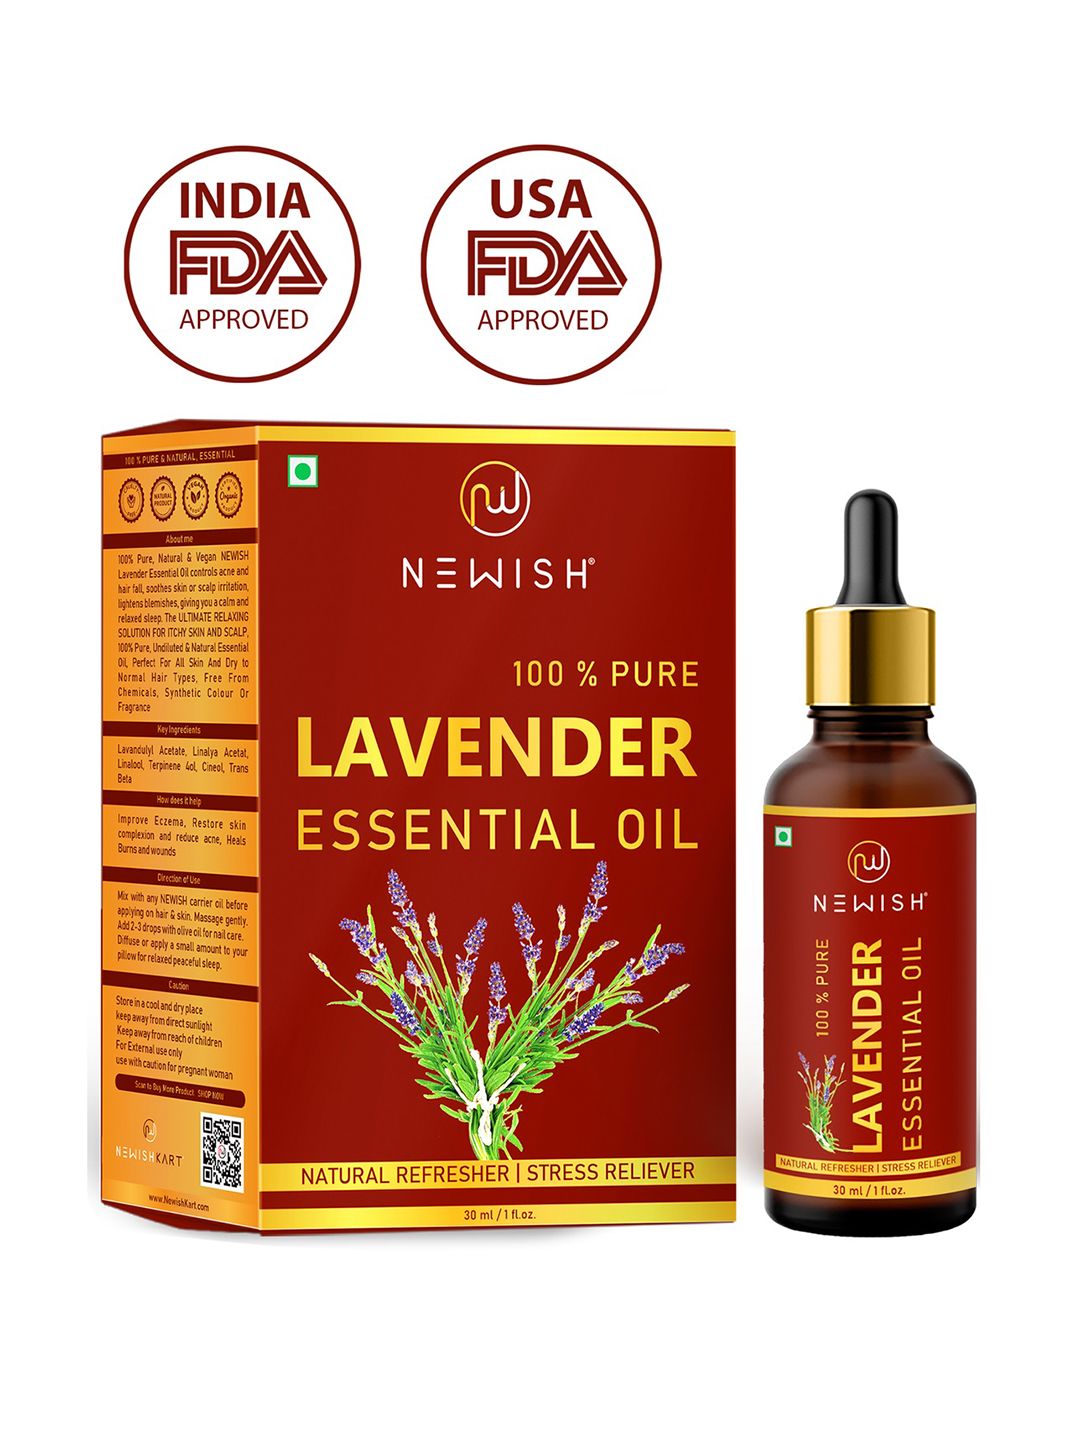 NEWISH Lavender Essential Oil for Hair, Skin & Diffuser 30ml Price in India